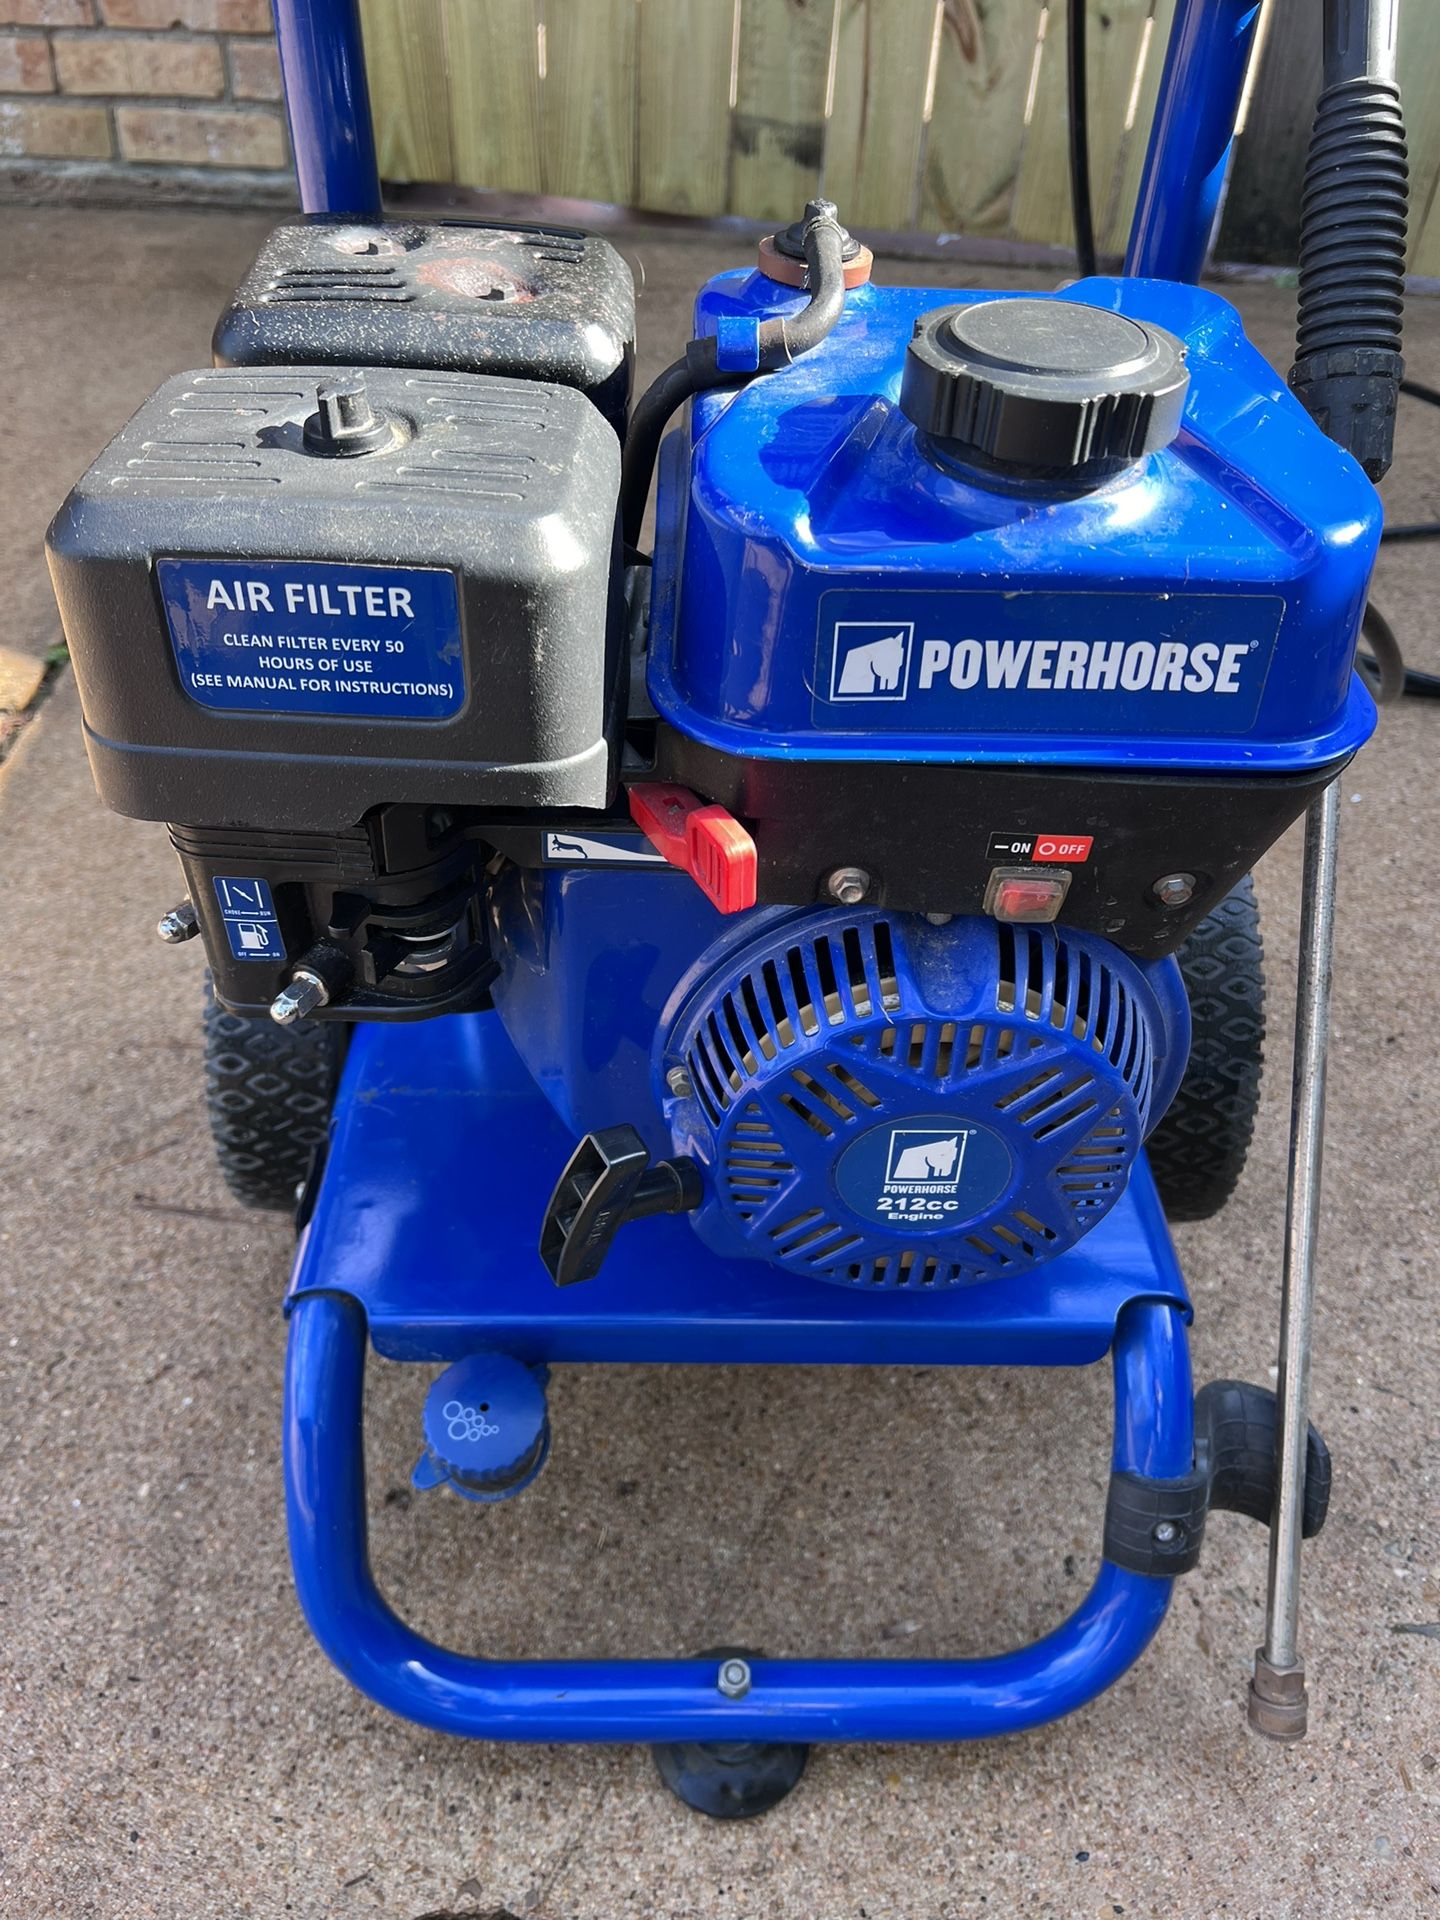 Powerhorse 3100 PSI, 2.5 GPM Gas Cold Water Pressure Washer